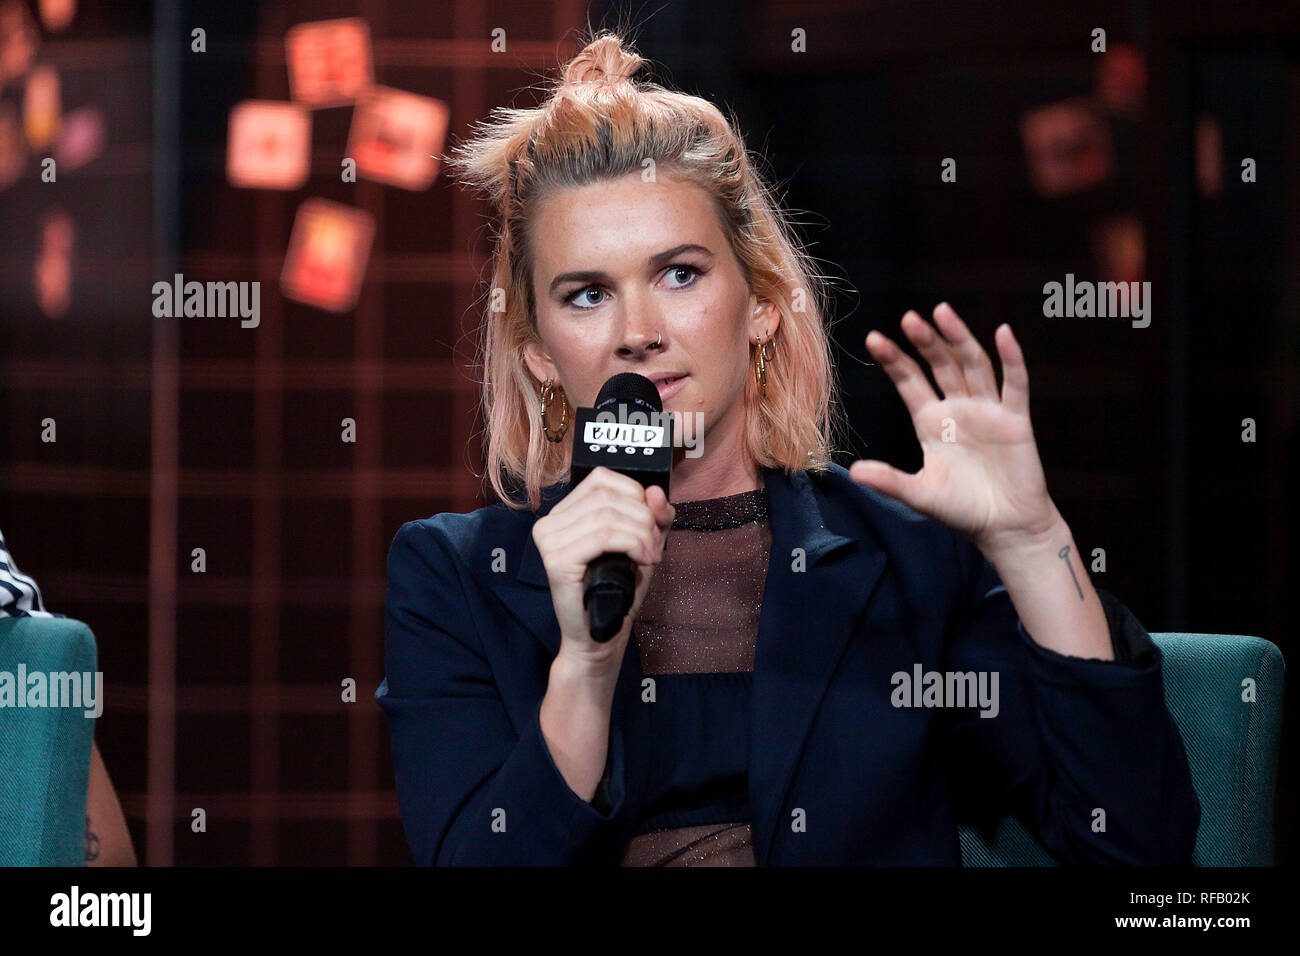 New York, USA. 24 Jan, 2019. Georgia Nott at The Thursday, Jan 24, 2019 BUILD Series Inside Candids of the band Broods discussing the new album 'Concious' at BUILD Studio in New York, USA. Credit: Steve Mack/S.D. Mack Pictures/Alamy Live News Stock Photo